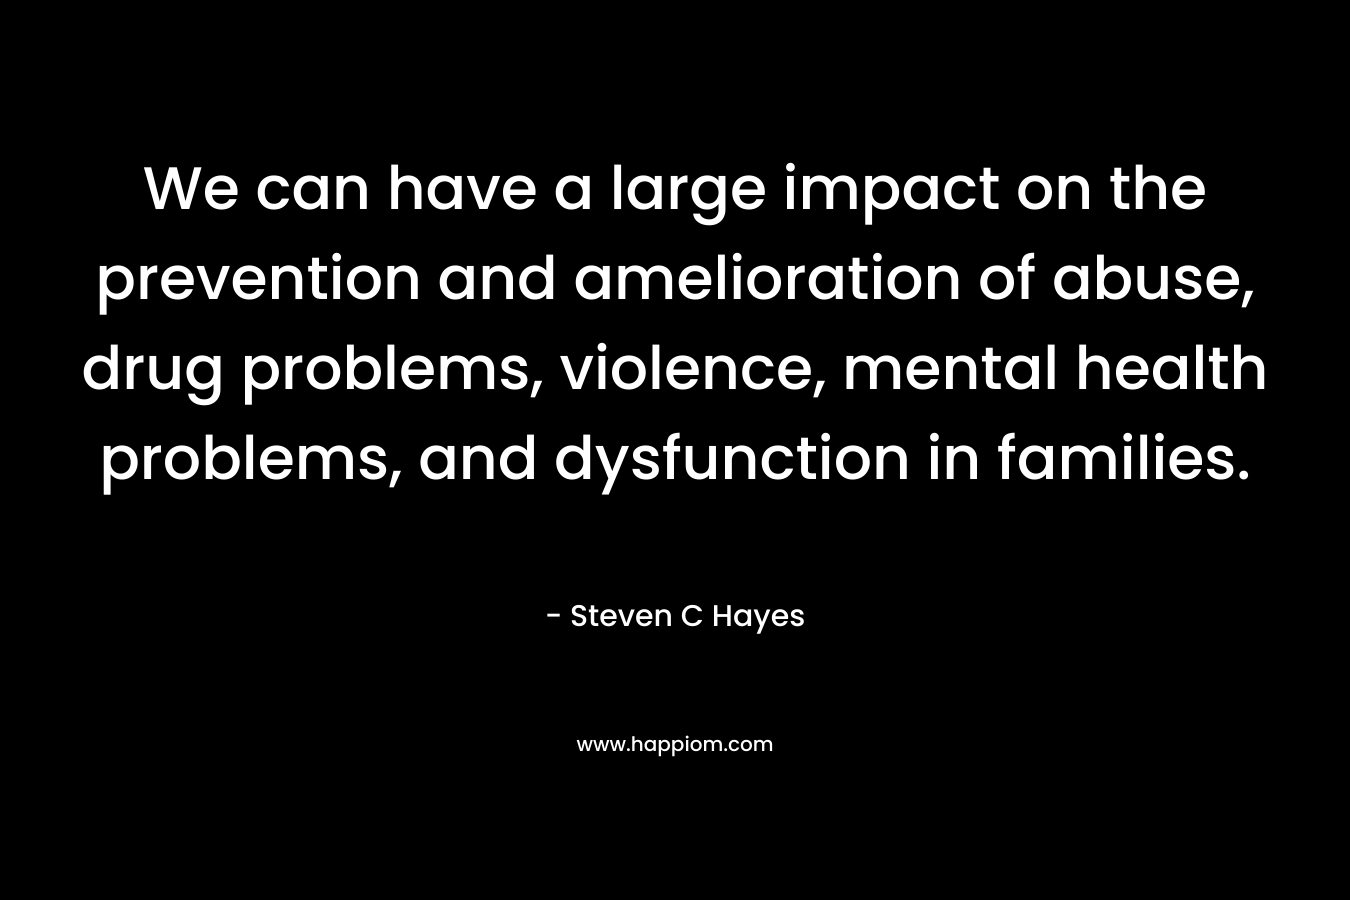 We can have a large impact on the prevention and amelioration of abuse, drug problems, violence, mental health problems, and dysfunction in families. – Steven C Hayes